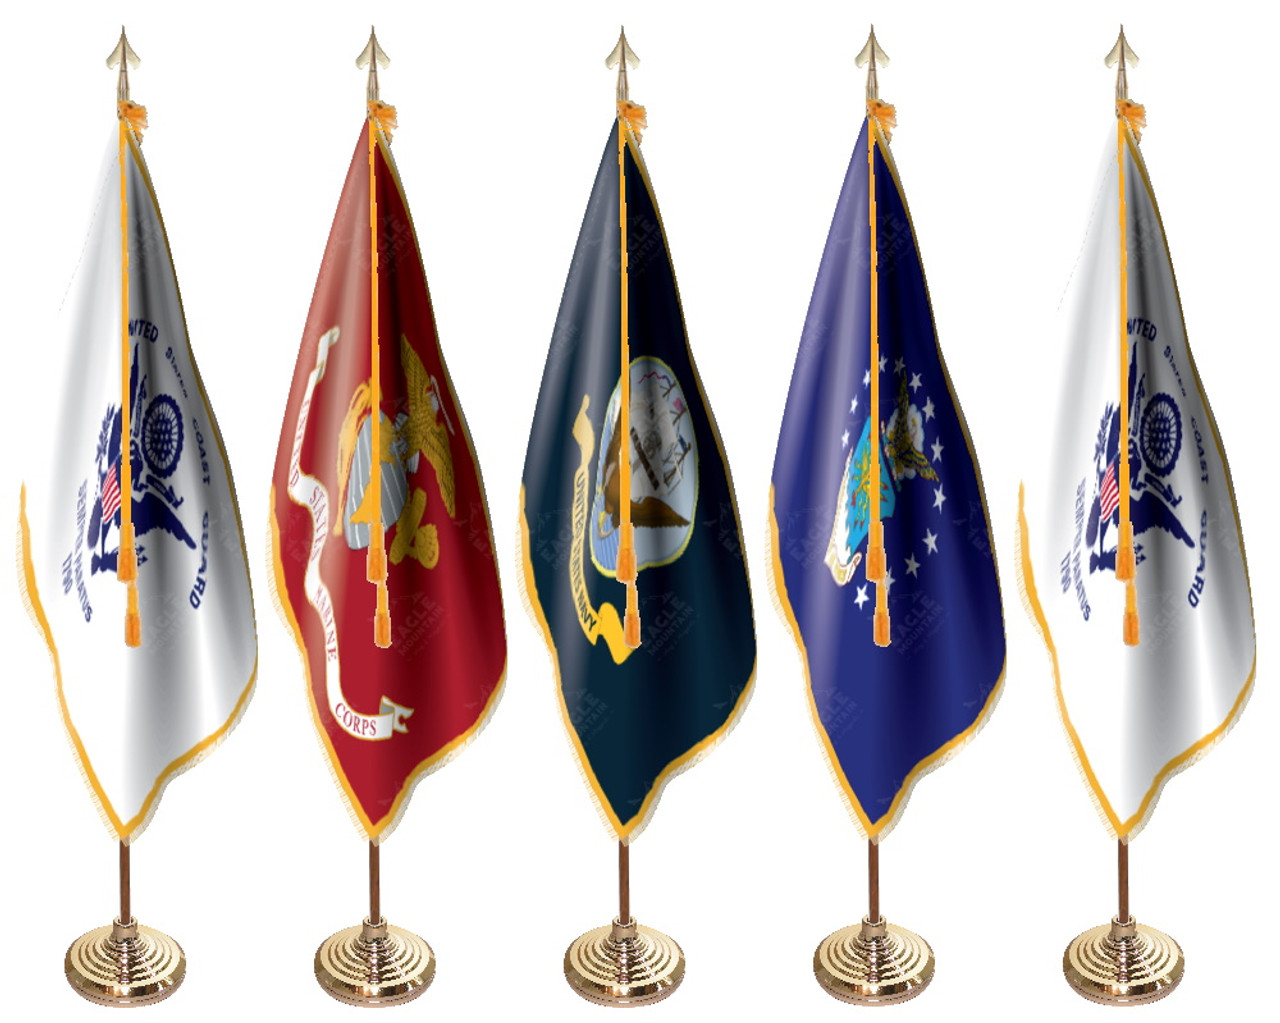 Deluxe Indoor and Parade Military Flag Set with 7' Presentation Hardware and Staff Spears, 3' x 5' (Set of 5 Flags), PRSET-MILSET-35-G-7-Staff (Open Market)